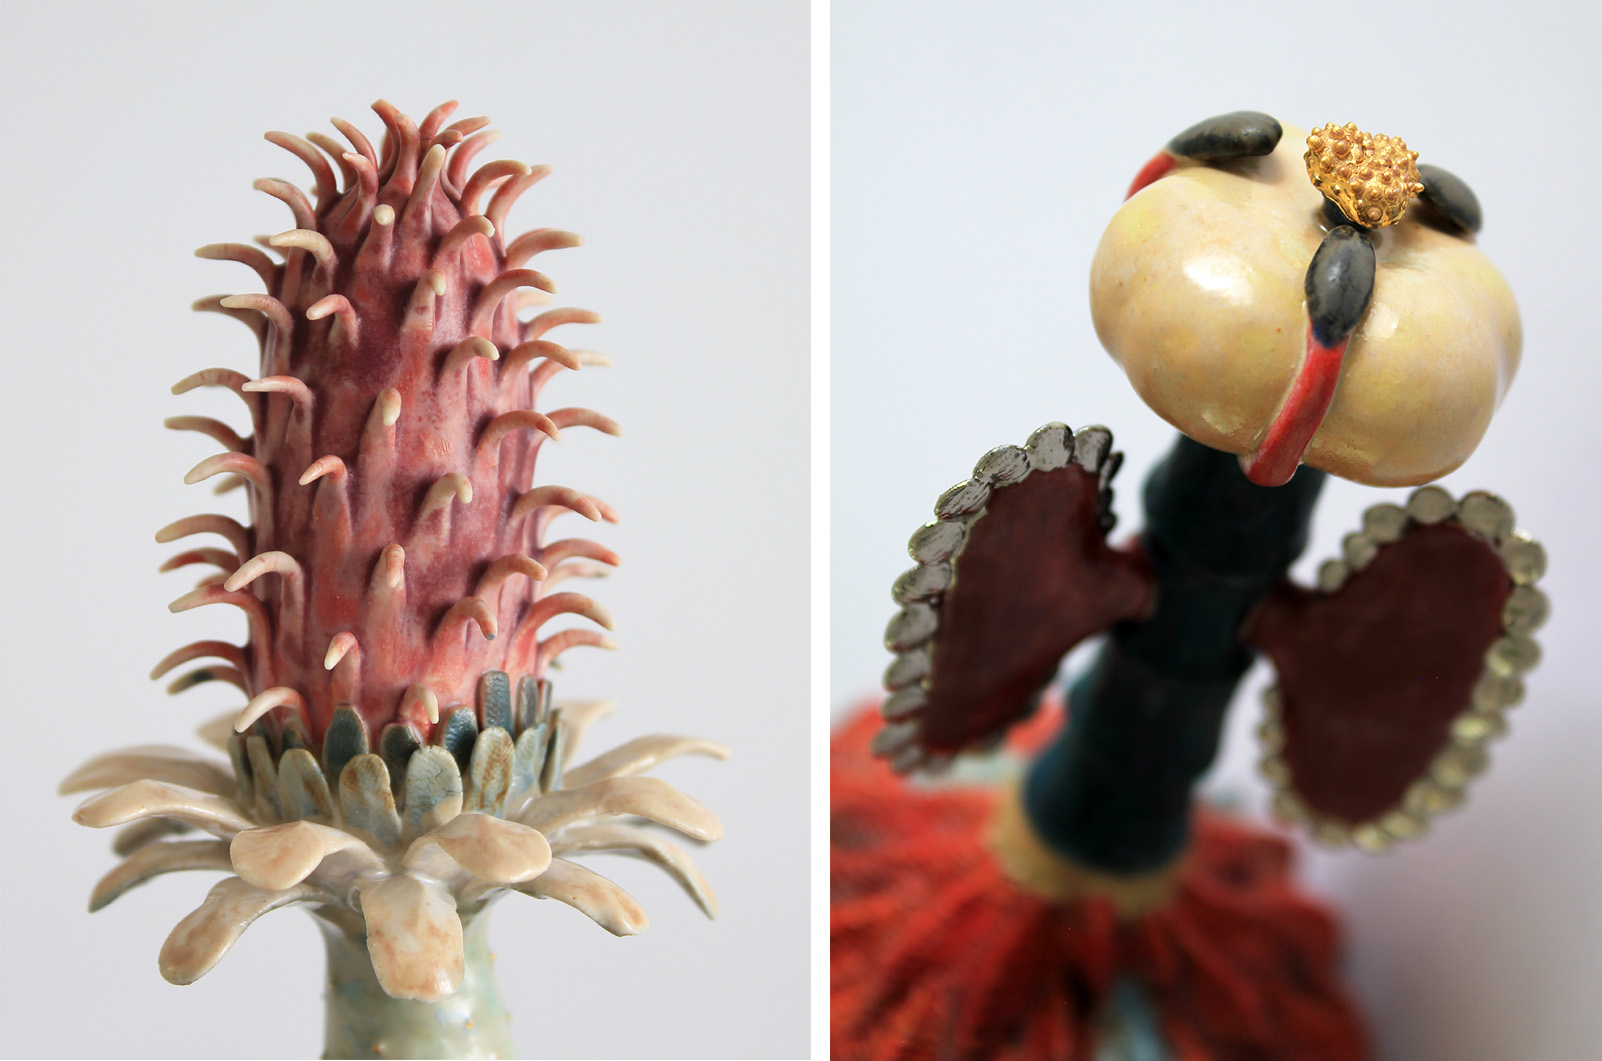 Two images side-by-side, each showing details of ceramic sculptures inspired by flowers and plants.